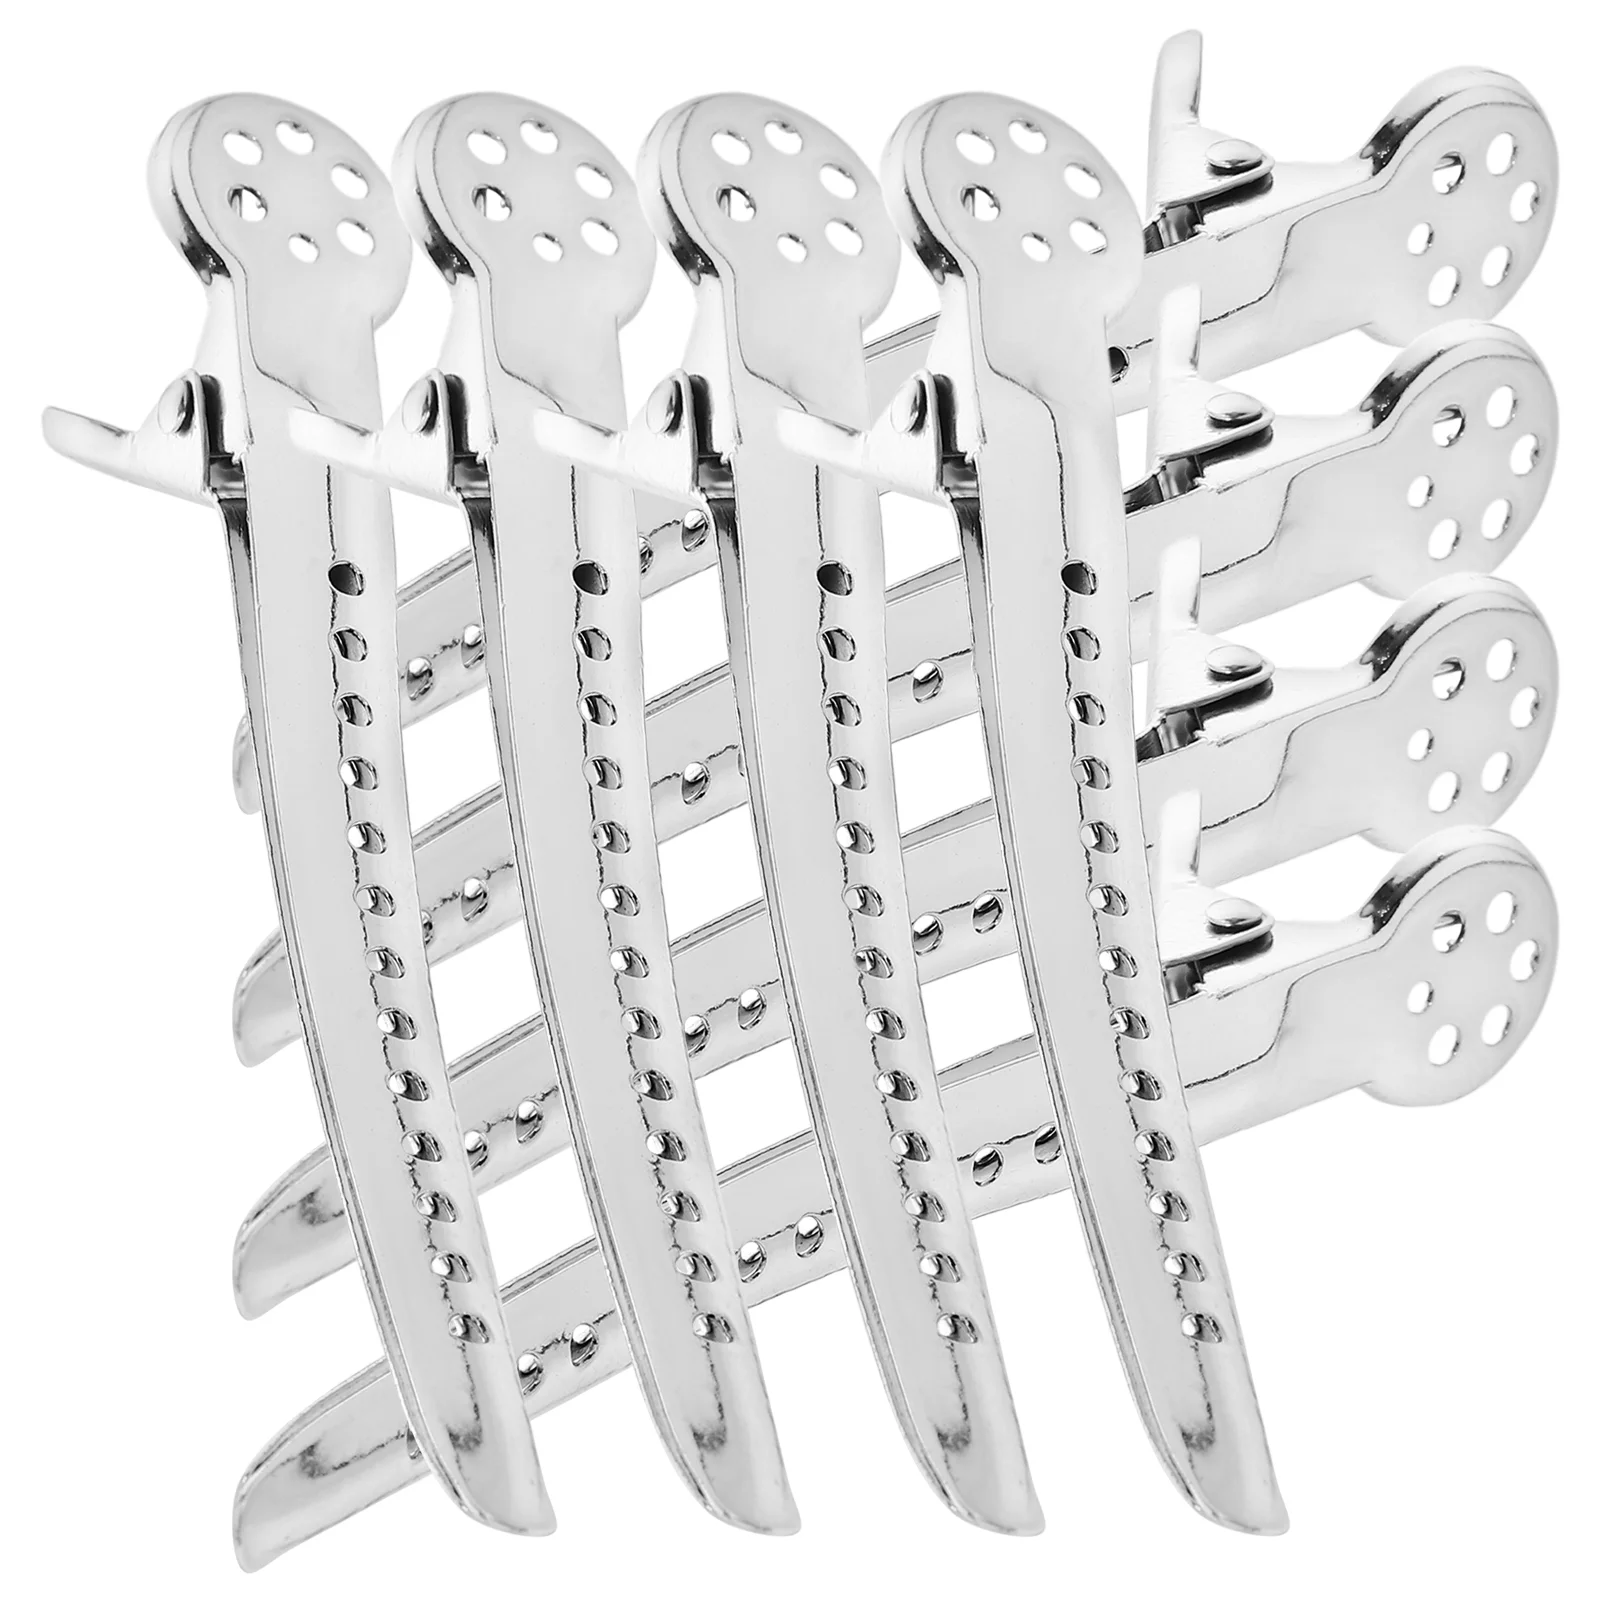 

8 PCS Metal Hairdressing Clip Modeling Location Hairpin Professional Clips Separating